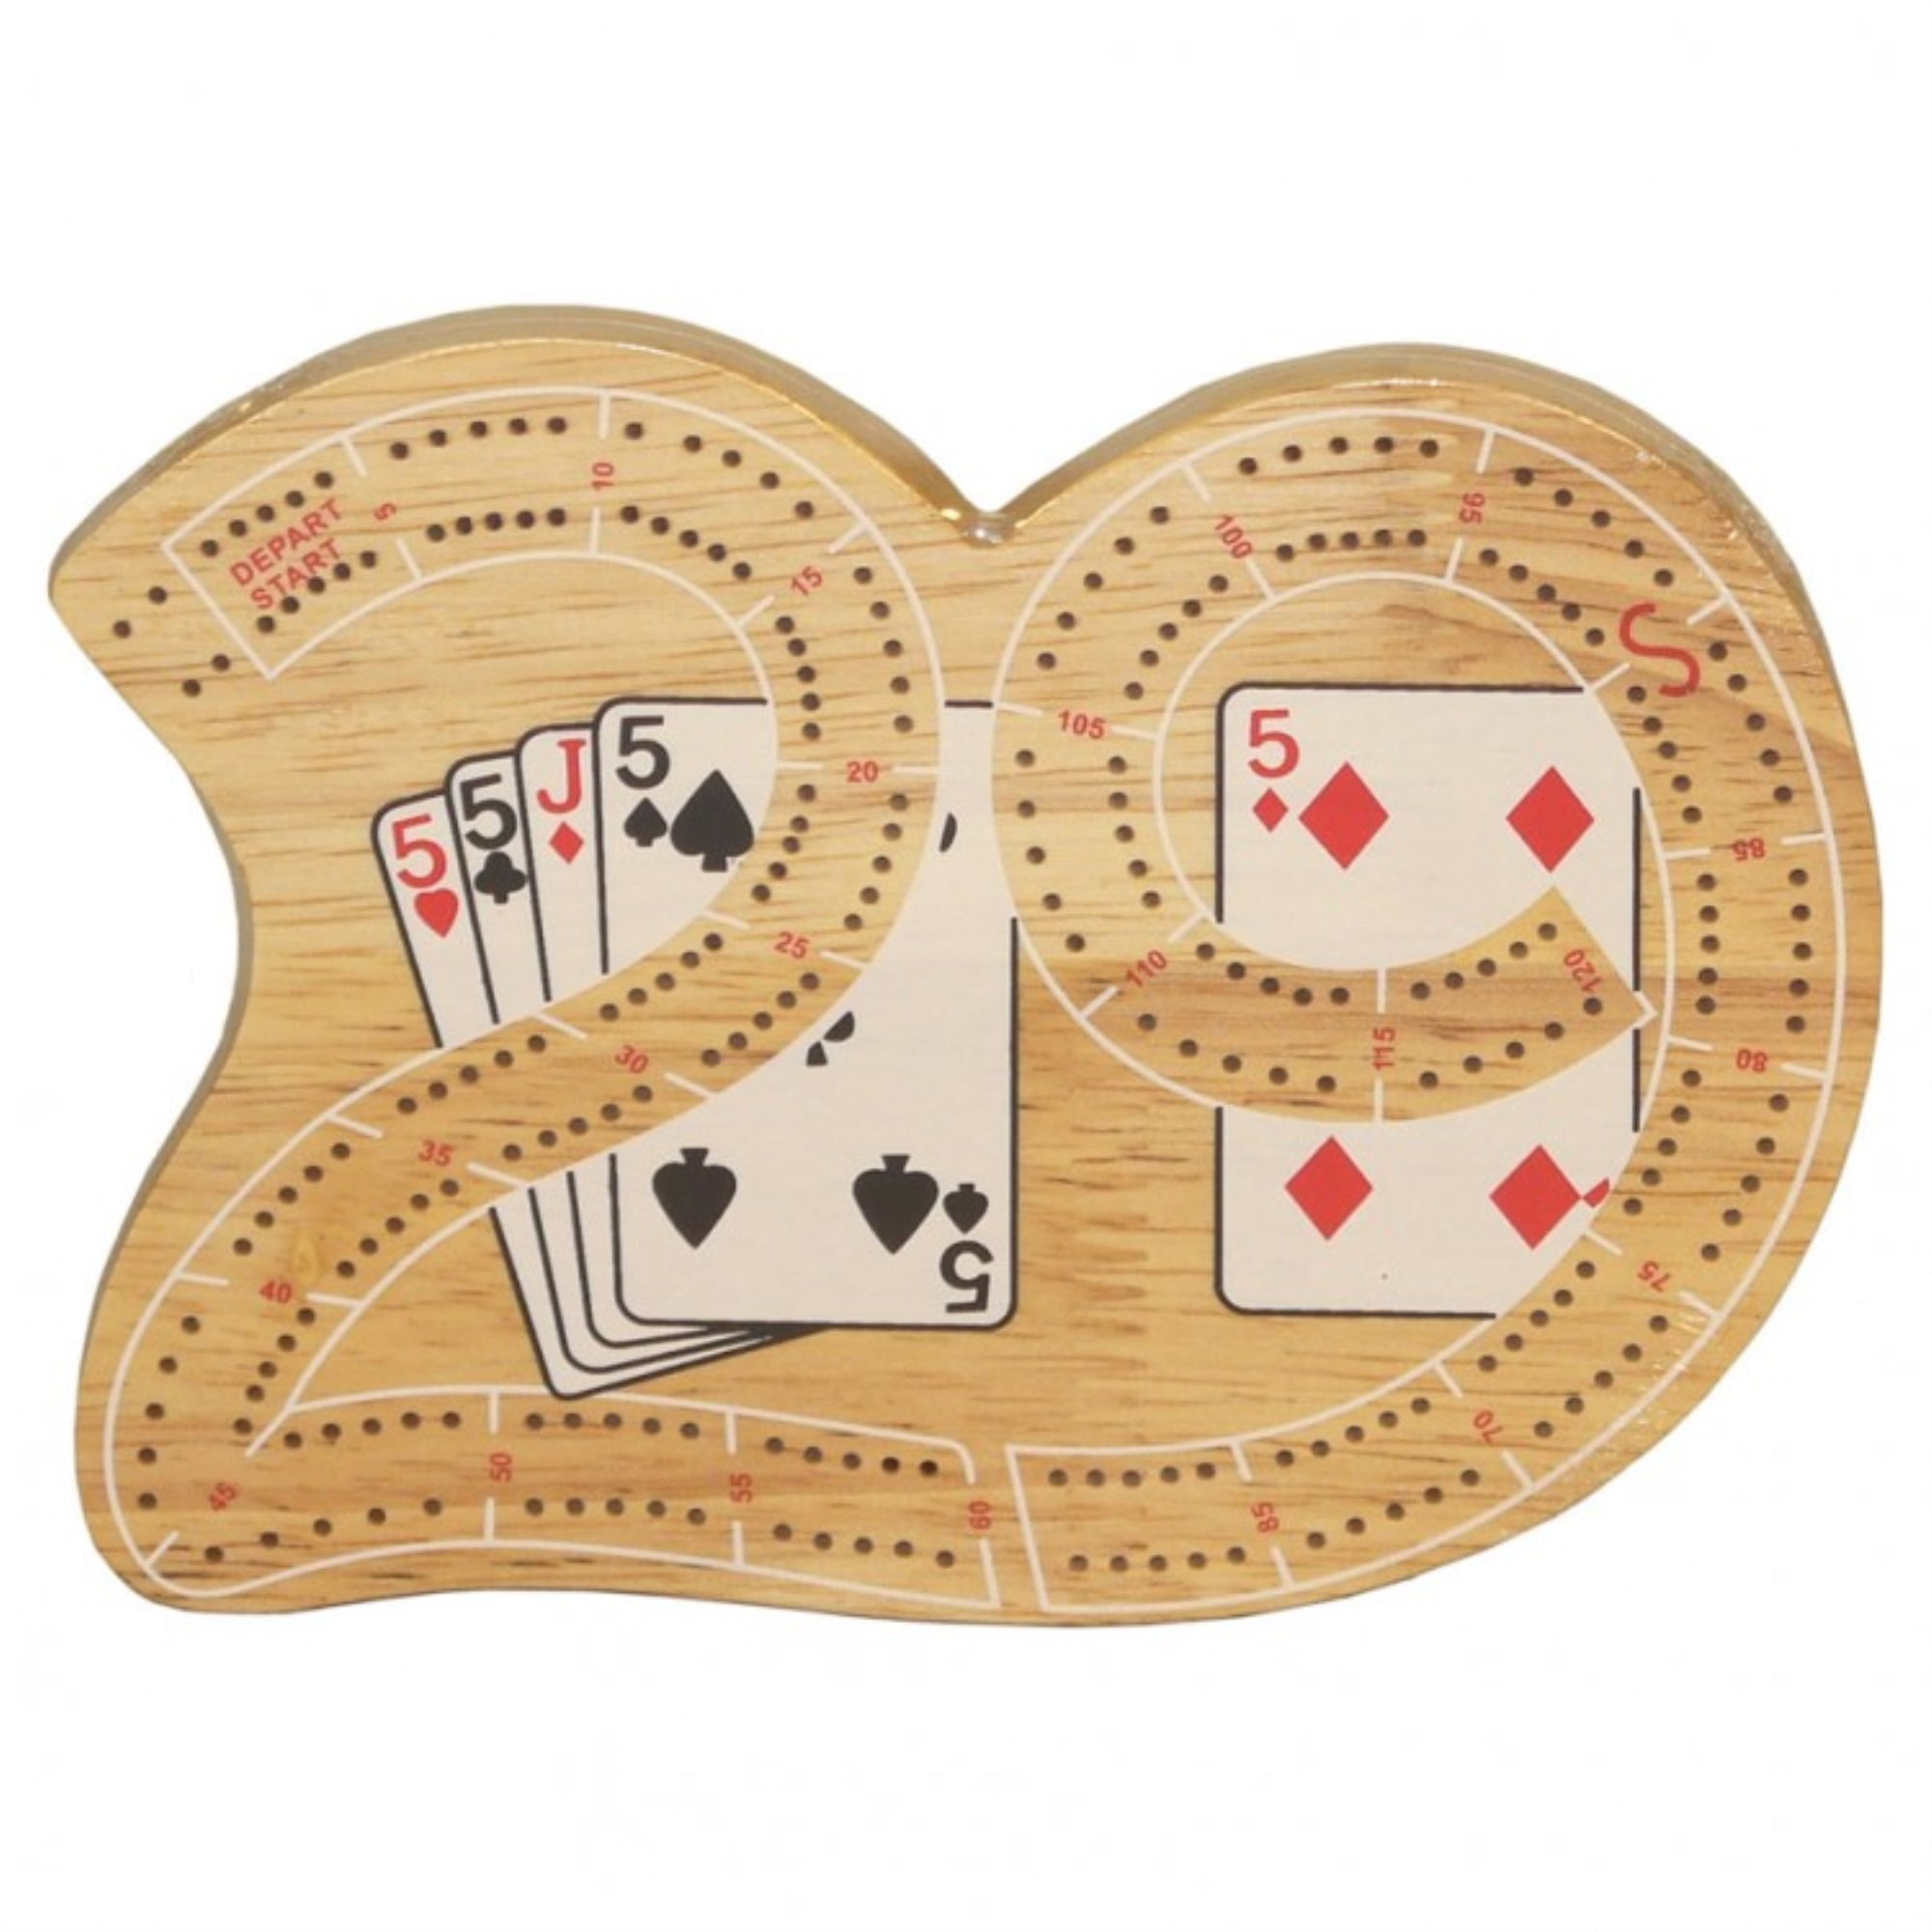 BICYCLE 29 Shape Cribbage Board 